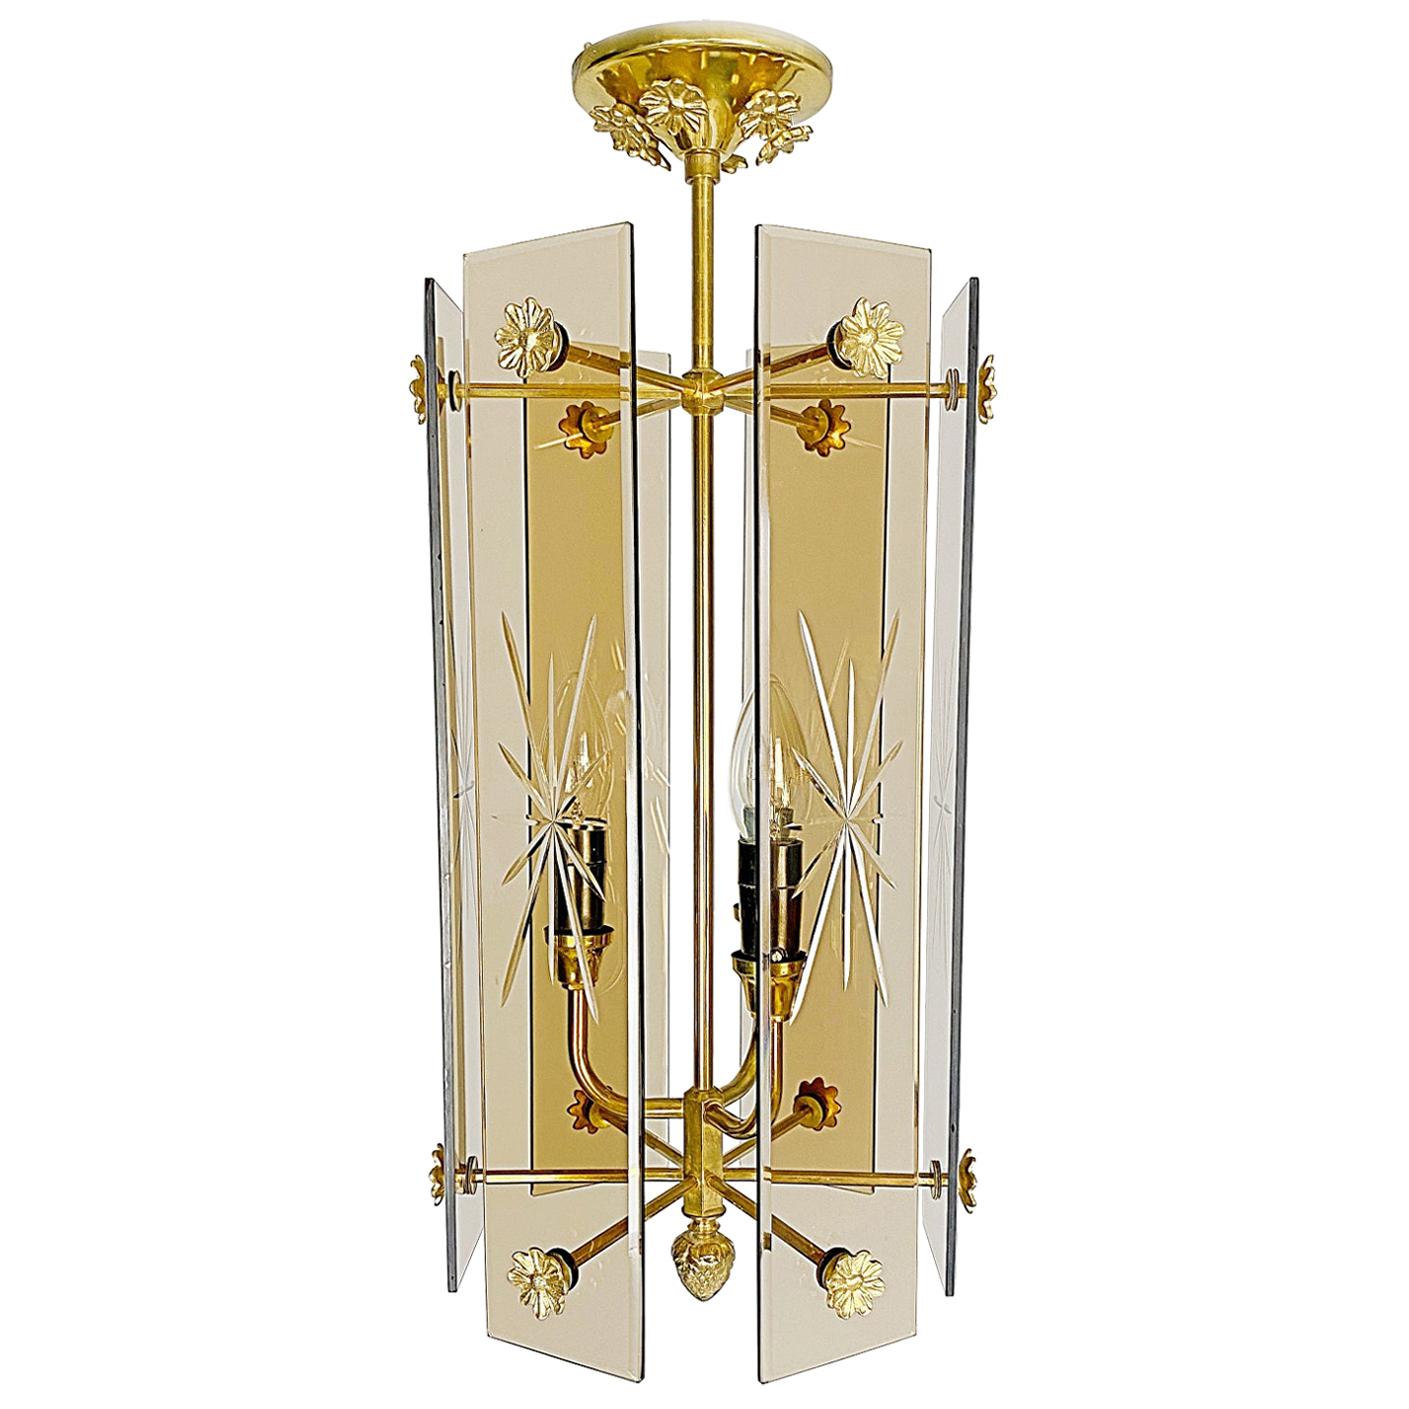 Beautiful Italian designer lantern made of brass and hand-carved, smoked glass, proving high-quality craftsmanship. Excellent original condition with a lovely patina. Three E14 Edison standard sockets, the lantern works on 110V - 240V.

we ship with